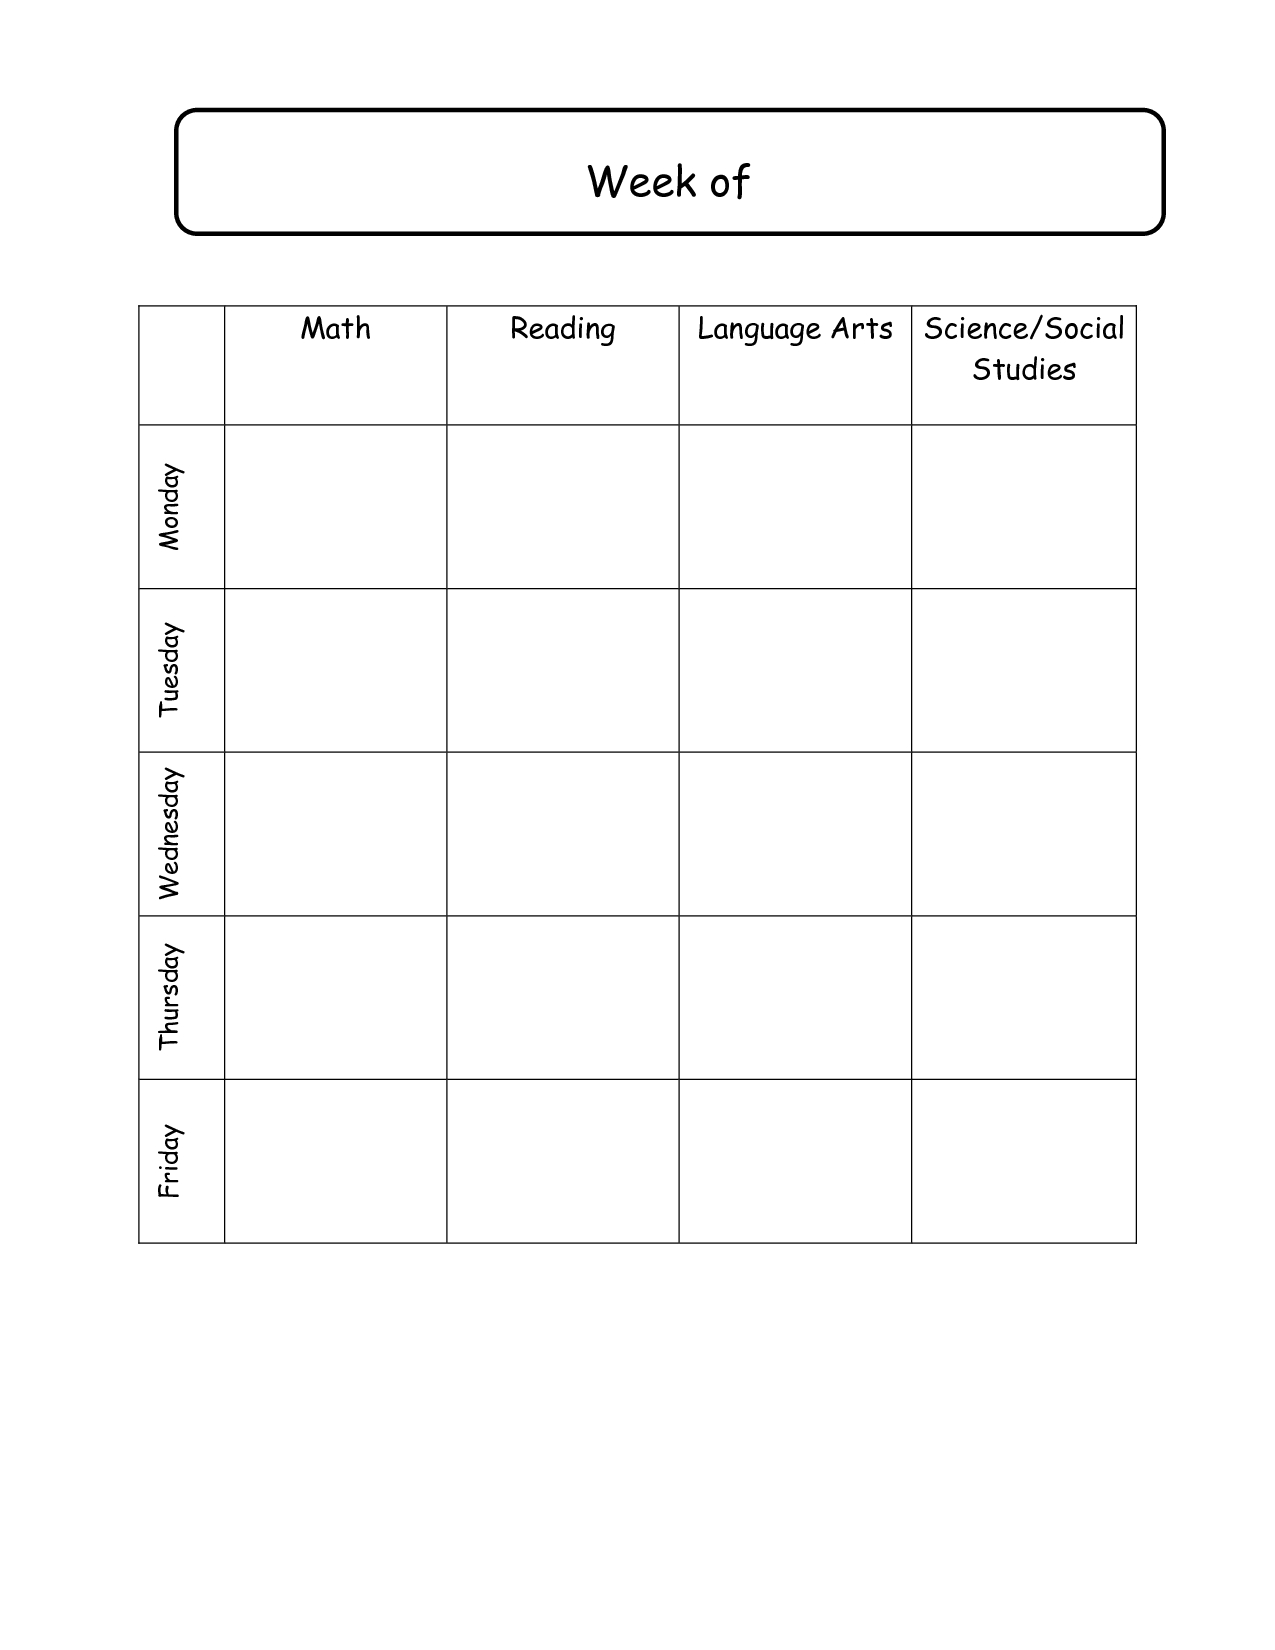 Elementary School Daily Schedule Template | Weekly Lesson-Weekly Lesson Plan Calendar Template